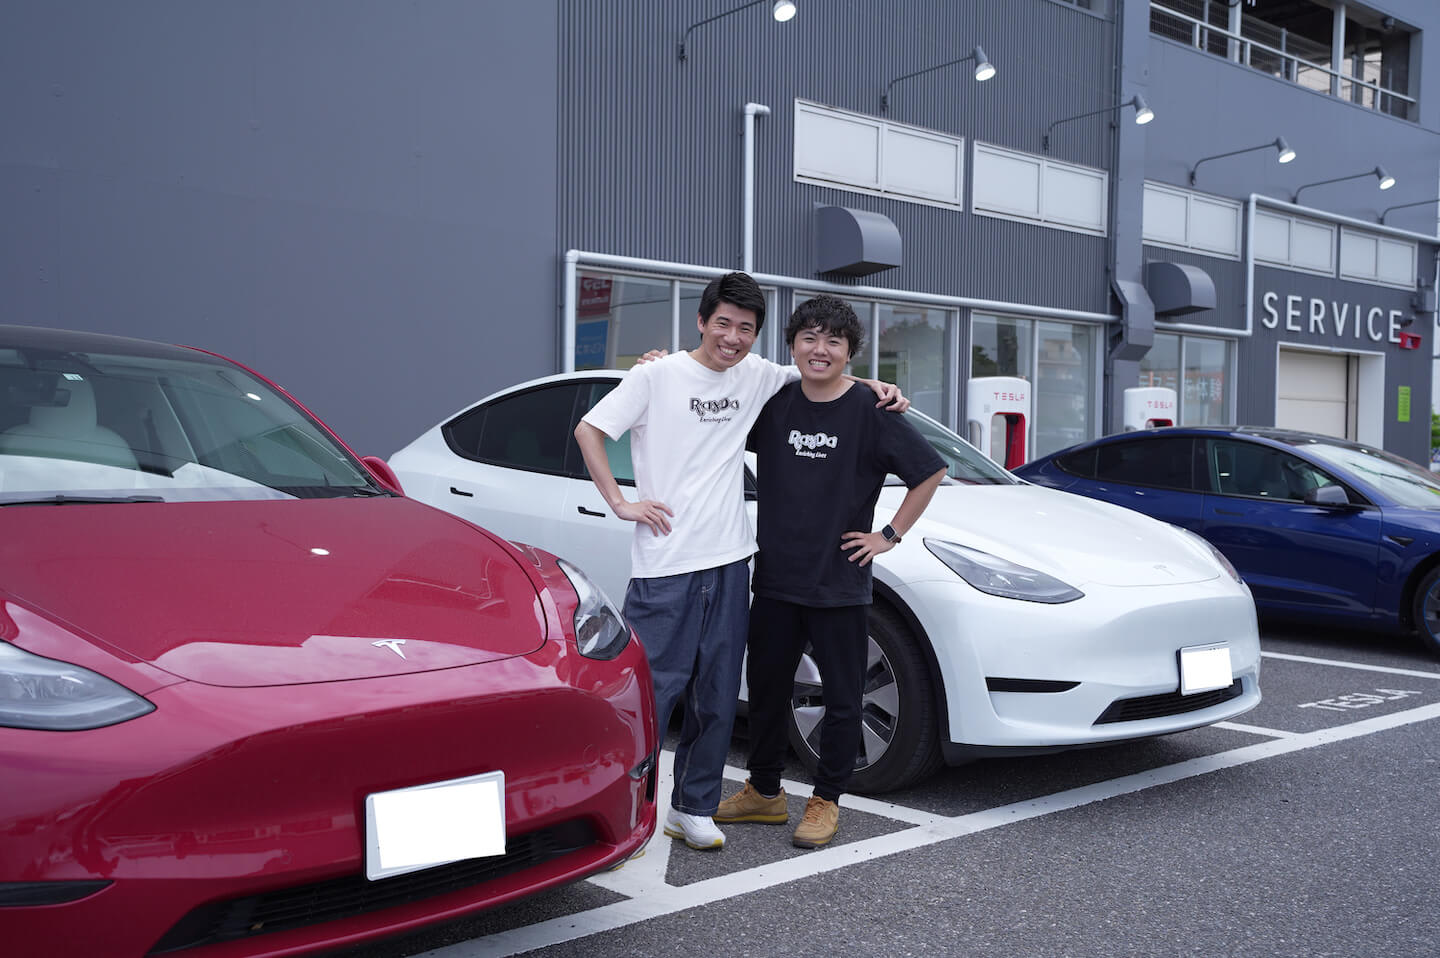 Tesla ownners, Ray and Daiki, standing next to their red Model Y and white Model Y at the parking lot of Tesla Service Cente